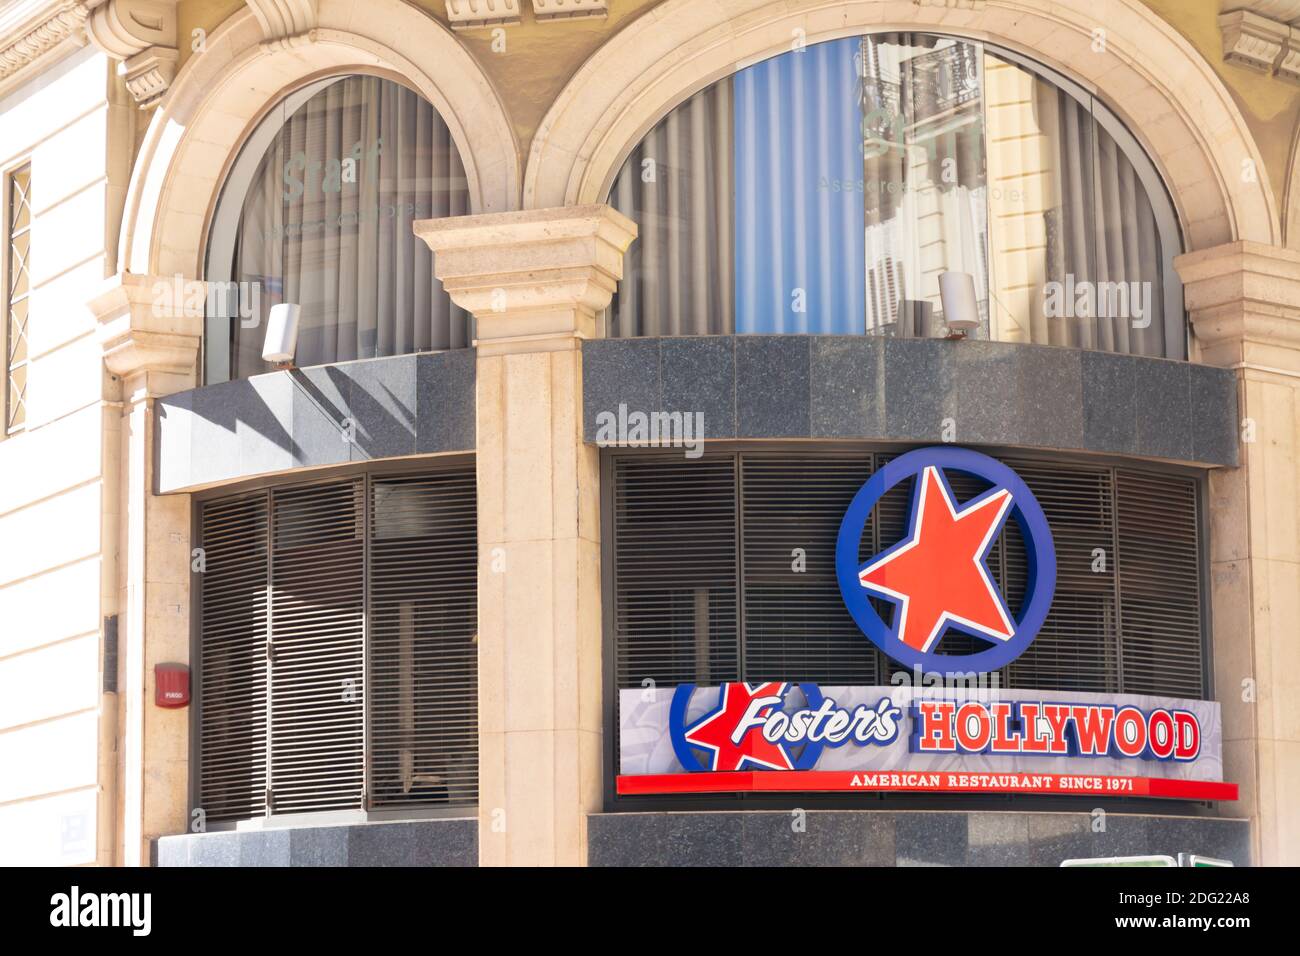 Valencia Spain. September 27, 2020: Fosters Hollywood restaurant sign and logo above one of its entrances. Located in the town hall square Stock Photo